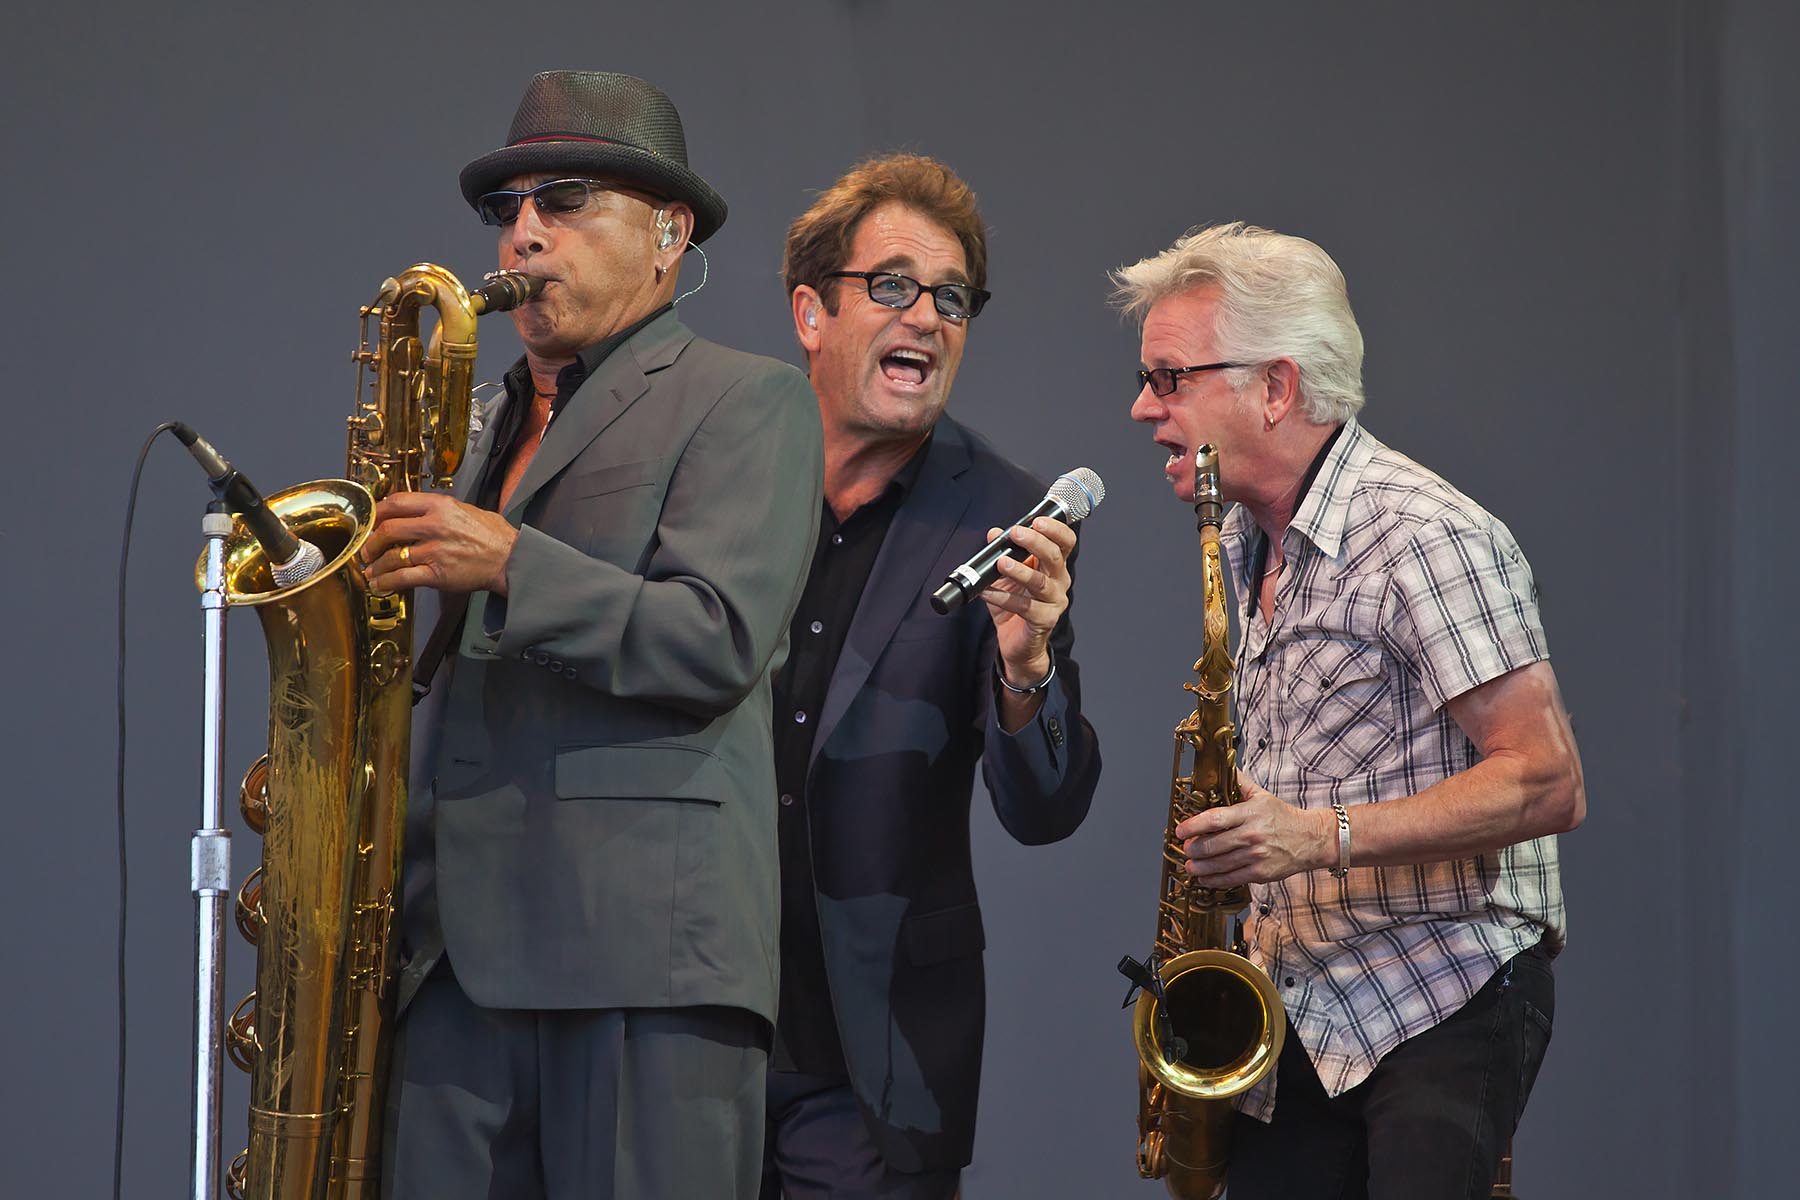 HUEY LEWIS AND THE NEWS perform SOULSVILLE on the Jimmy Lyons Stage - 54TH MONTEREY JAZZ FESTIVAL 2011